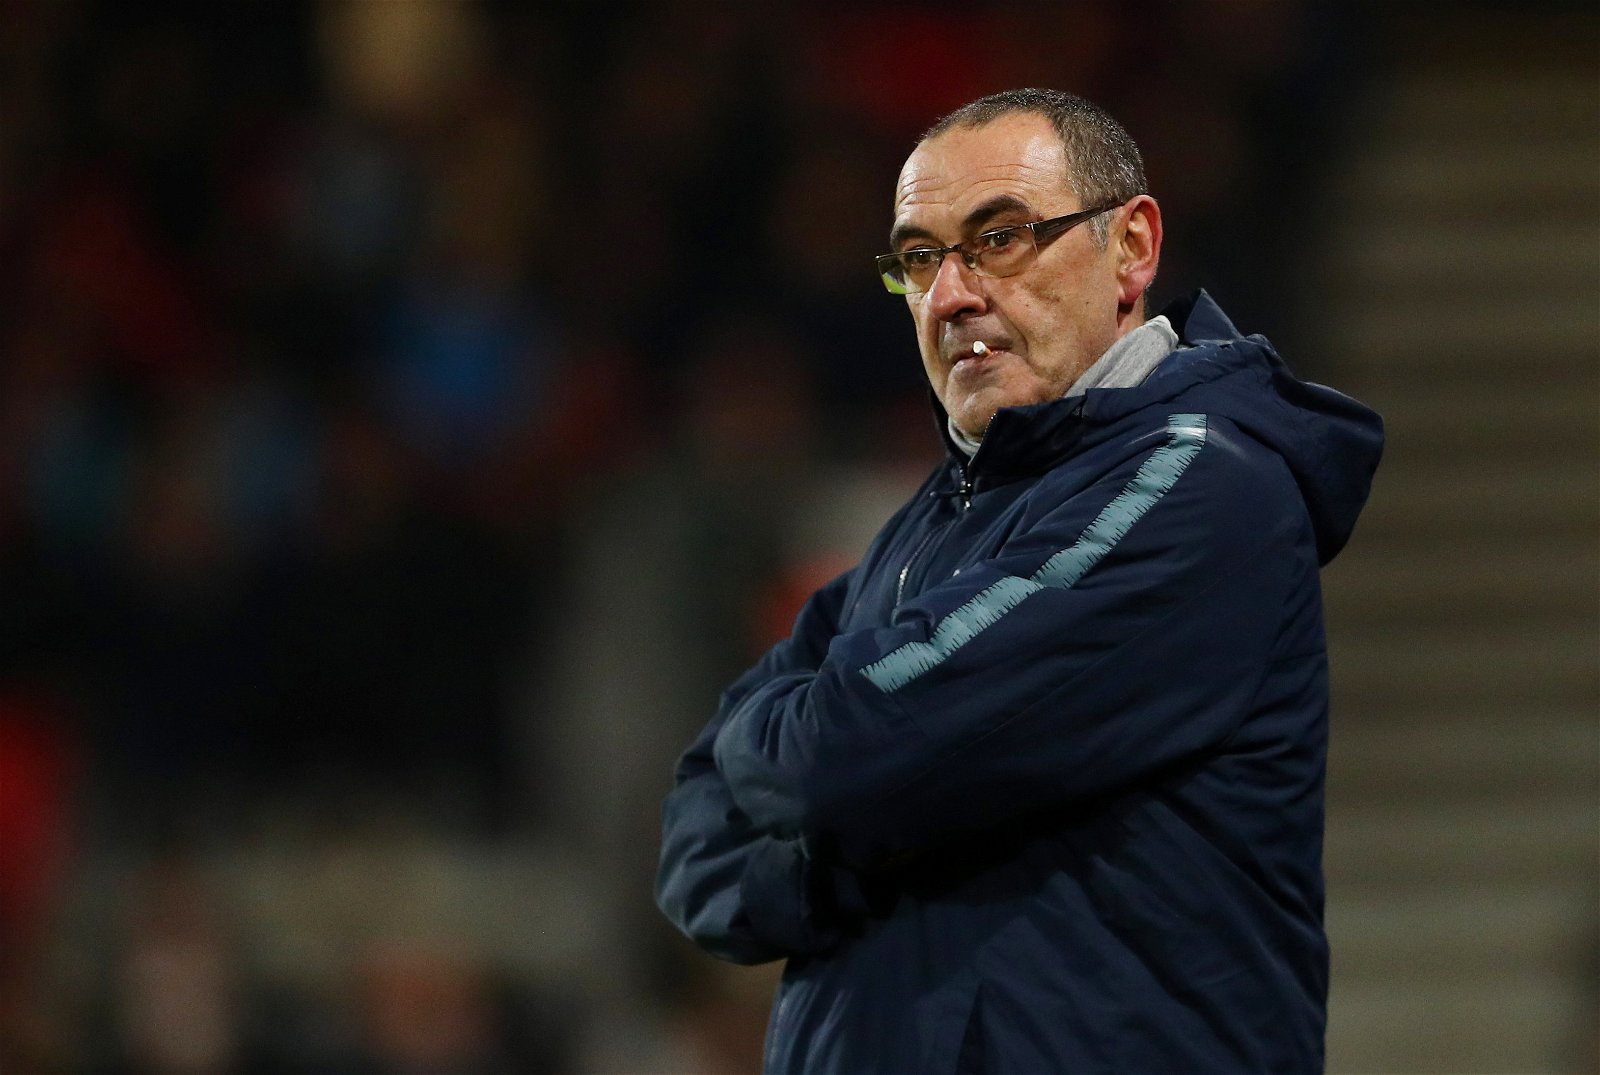 Sarri Needs Time At Chelsea: Cole